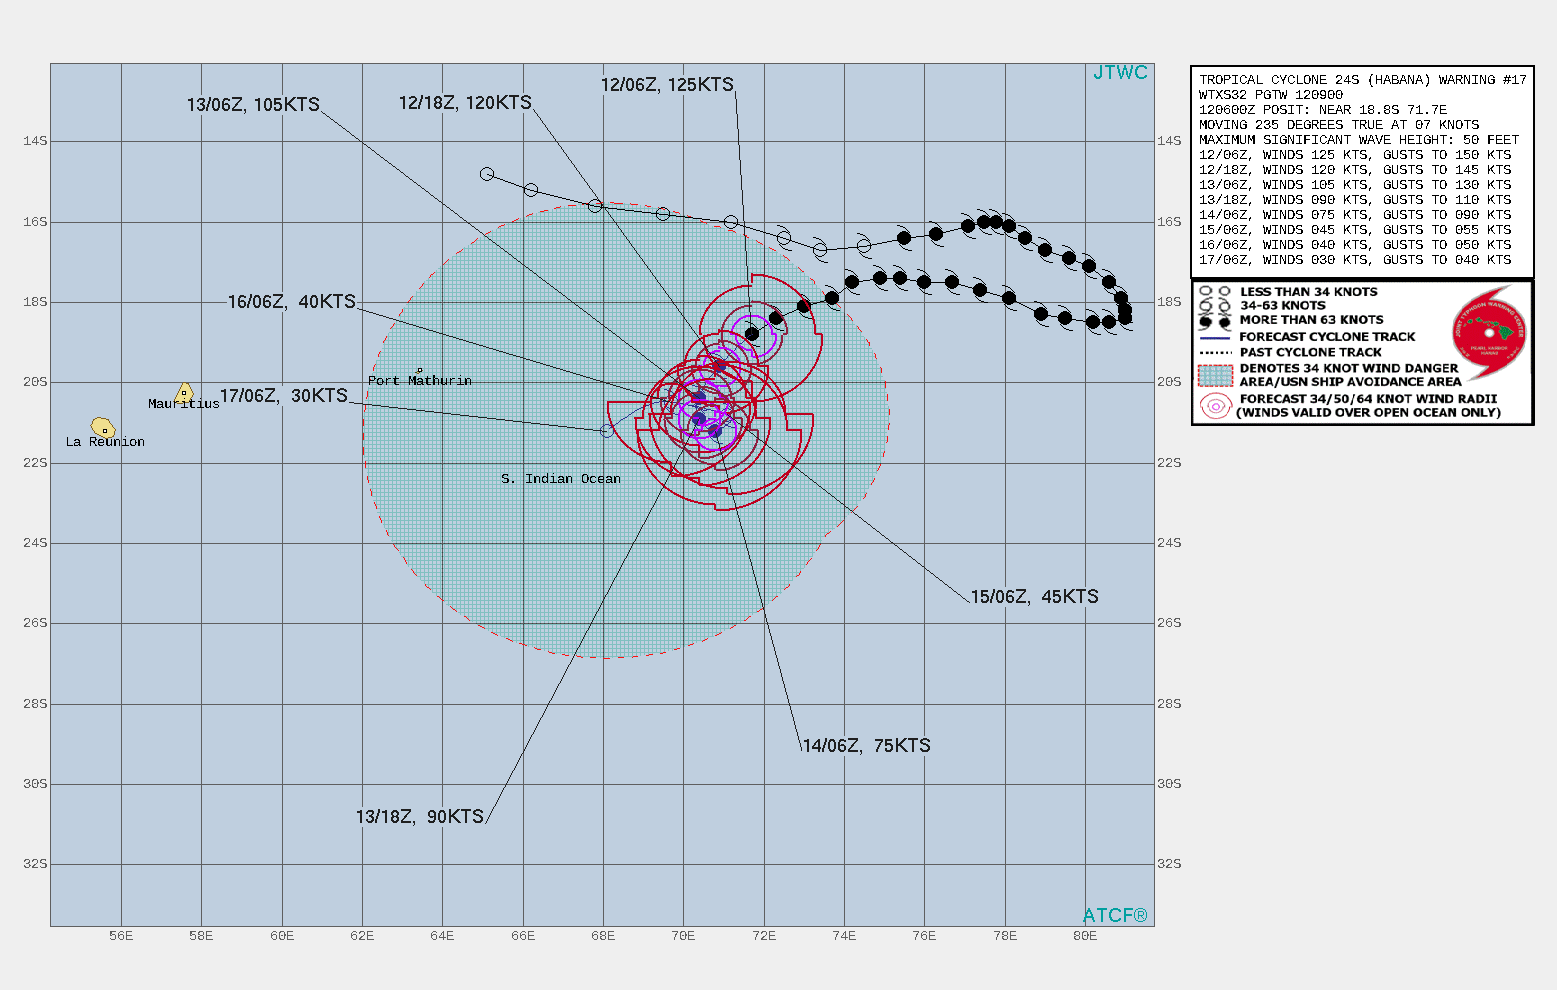 24S(HABANA). WARNING 17 ISSUED AT 12/09UTC. TC 24S IS IN AN OVERALL FAVORABLE ENVIRONMENT WITH LOW (05-10KT) VERTICAL WIND SHEAR AND WARM  (28-29C) ALONG-TRACK SEA SURFACE TEMPERATURES (SSTS) THAT ARE PARTLY  OFFSET BY LIMITED RADIAL OUTFLOW. ANALYSIS ALSO INDICATES COLD DRY  AIR INTRUSION INTO THE CENTER, AS EVIDENCED IN THE MOST RECENT TOTAL  PRECIPITABLE WATER ANIMATION. THIS ADDITIONAL NEGATIVE FACTOR WILL  AID IN GRADUAL WEAKENING TO 105KNOTS/CATEGORY 3 IN THE NEXT 24HRS AS THE CYCLONE  CONTINUES TO TRACK SOUTHWESTWARD ALONG THE NORTHWEST PERIPHERY OF A  WEAK SUBTROPICAL RIDGE (STR) TO THE SOUTHEAST. AFTER 24H, AS THE  STR RECEDES EASTWARD AND REORIENTS, TC 24S WILL SIGNIFICANTLY SLOW  DOWN AND TRACK SOUTHWARD INTO A COL BETWEEN THE STEERING STR AND A  SECONDARY STR APPROACHING FROM THE SOUTHWEST. THE SYSTEM WILL BECOME  QUASI-STATIONARY (QS) IN A COUNTER-CLOCKWISE LOOPING MOTION UNTIL AT  LEAST 72H. AFTERWARD, THE SECONDARY STR WILL ASSUME STEERING AND  SLOWLY DRIVE THE SYSTEM IN A GENERALLY WESTWARD DIRECTION. THE QS  STORM MOTION WILL INDUCE LOCALIZED UPWELLING AND FURTHER COOL THE  SSTS, RESULTING IN A RAPID WEAKENING TO 45KNOTS BY 72H. AFTER 72H, AS THE CYCLONE EJECTS FROM THE COL AND TRACKS WESTWARD, IT WILL  ENCOUNTER INCREASING VERTICAL WIND SHEAR, LEADING TO INTENSITY FALLING BELOW 35KNOTS BY 120H.